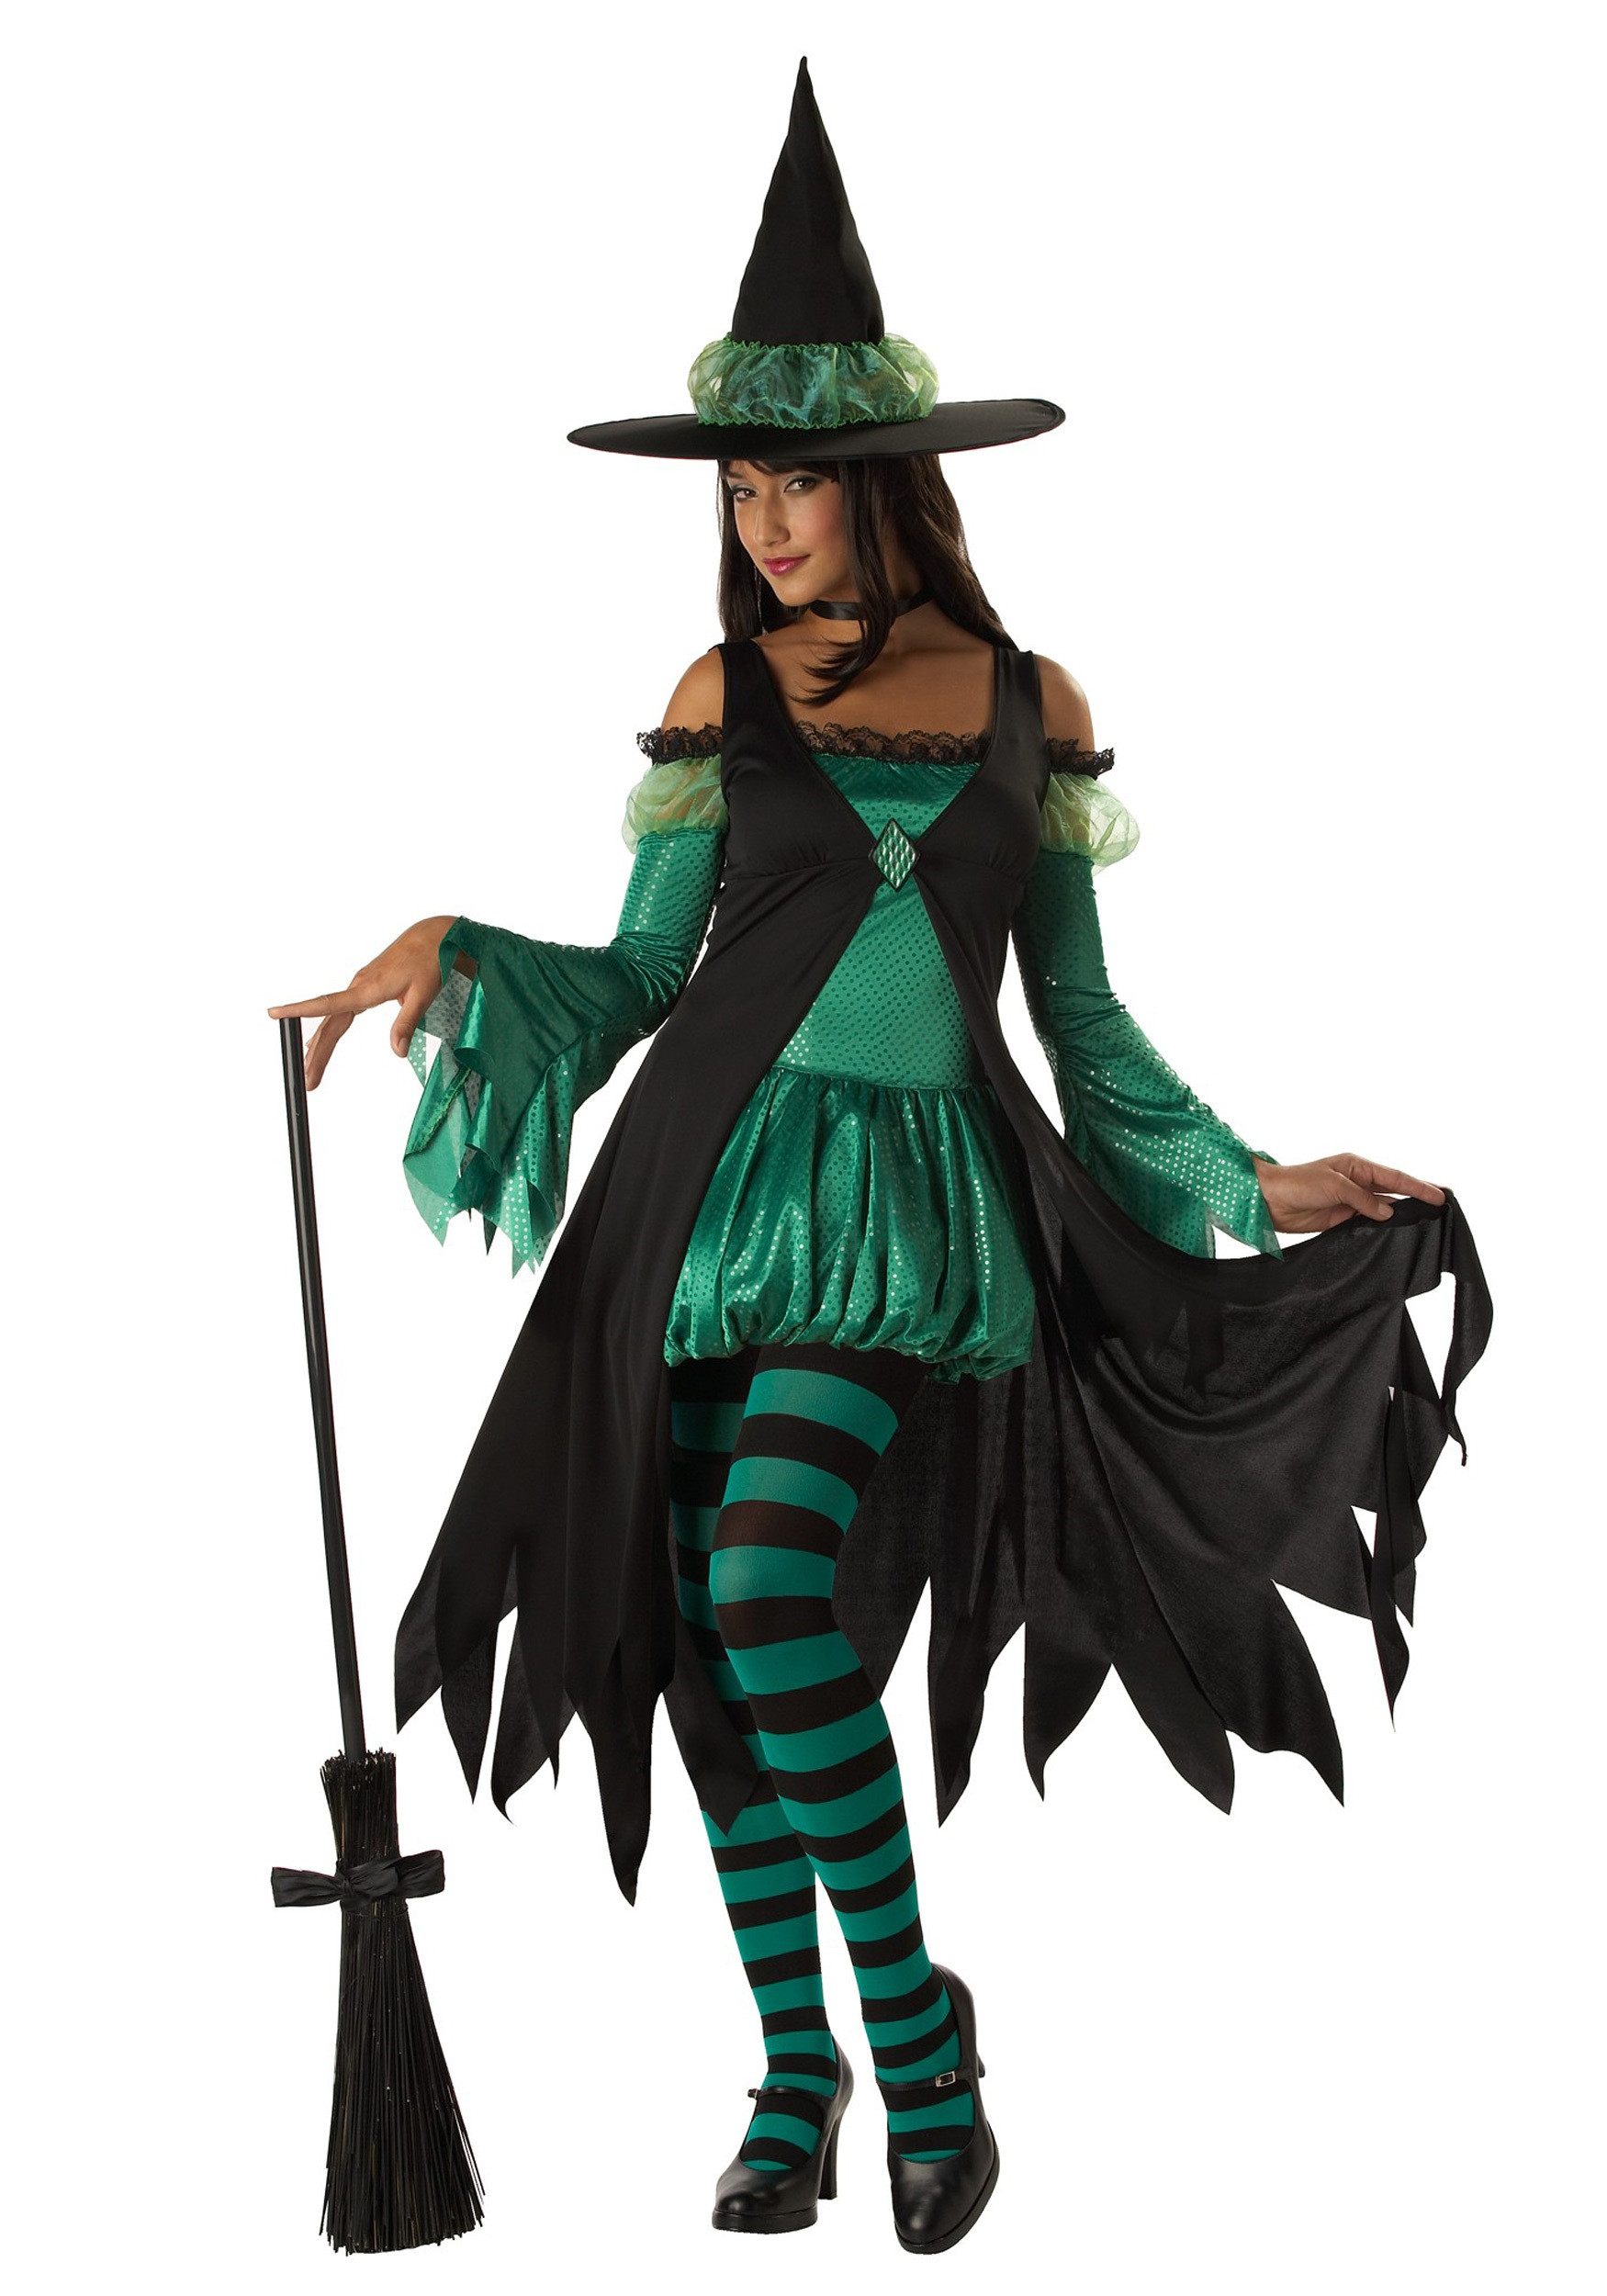 DIY Adult Witch Costume
 Adult Emerald Witch Costume